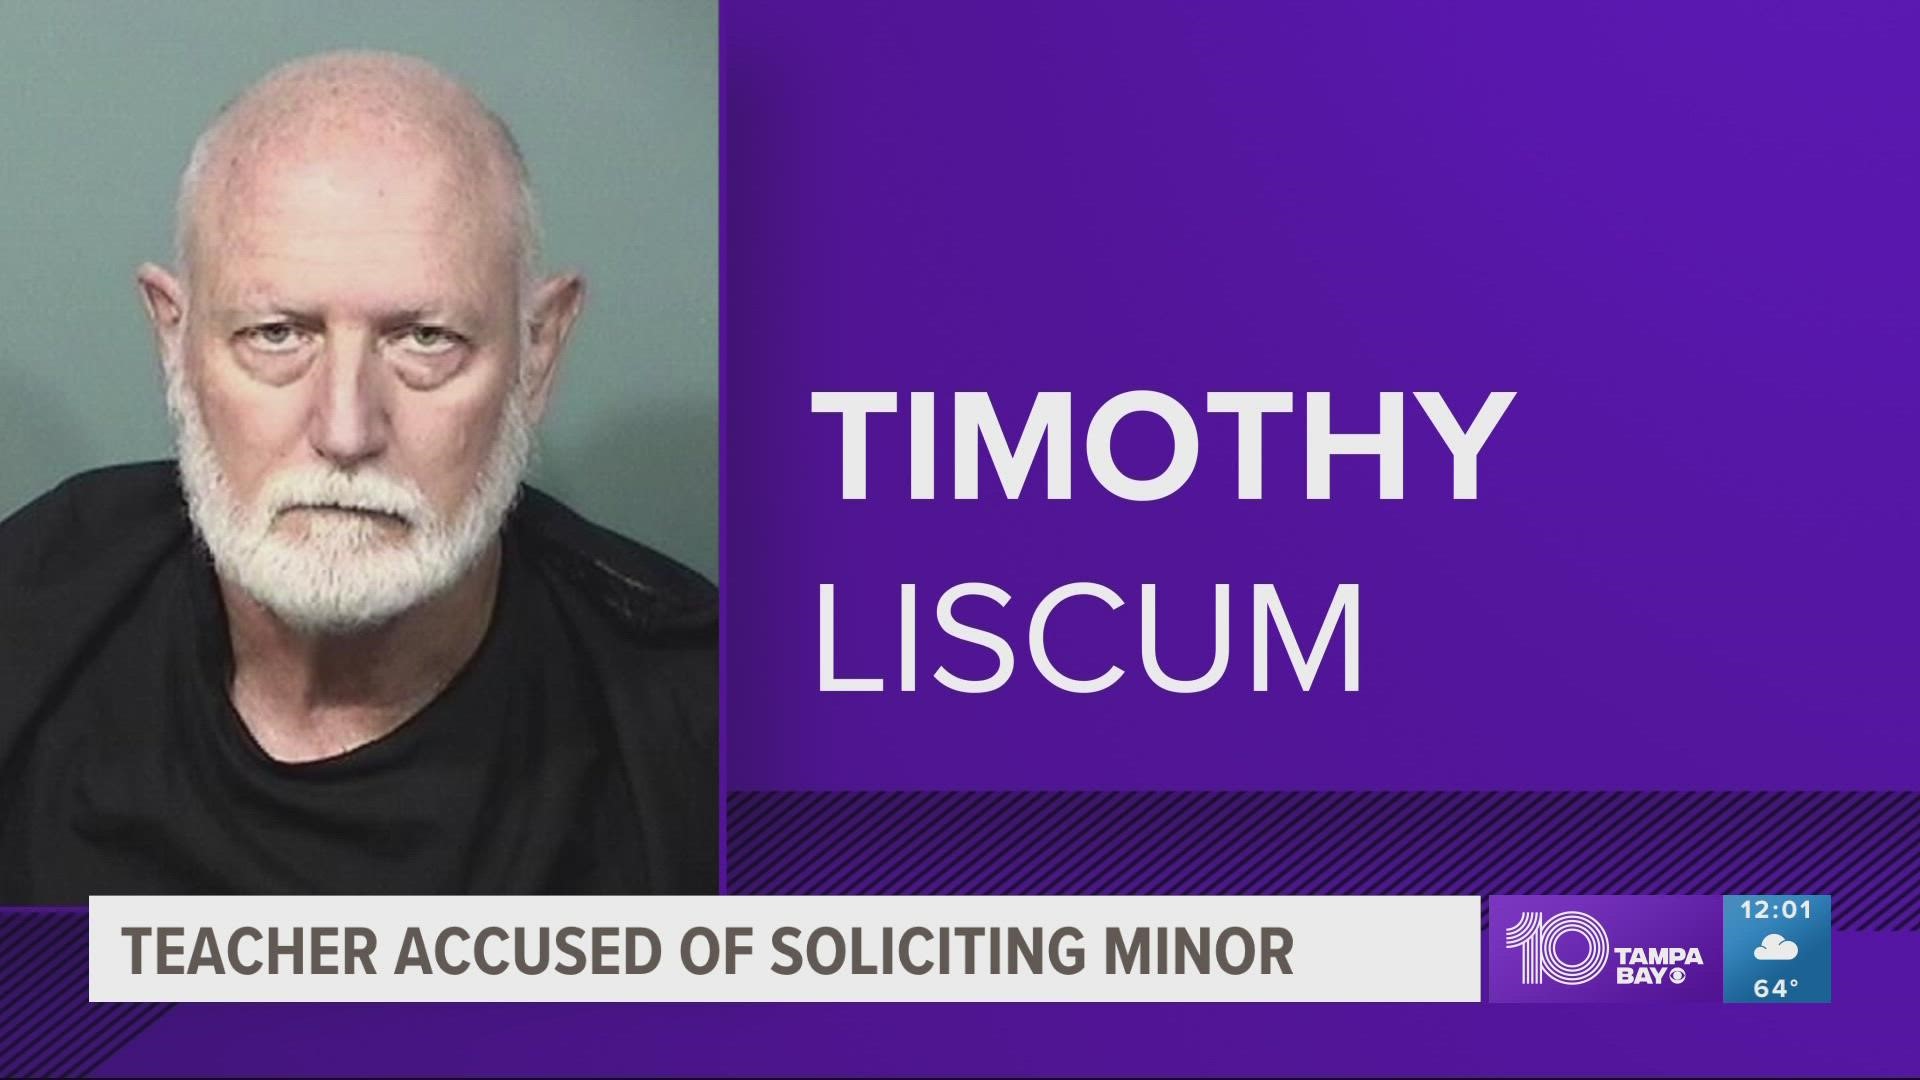 Authorities say Timothy Liscum was arrested after he drove to a location where he believed he was meeting a student for sex.